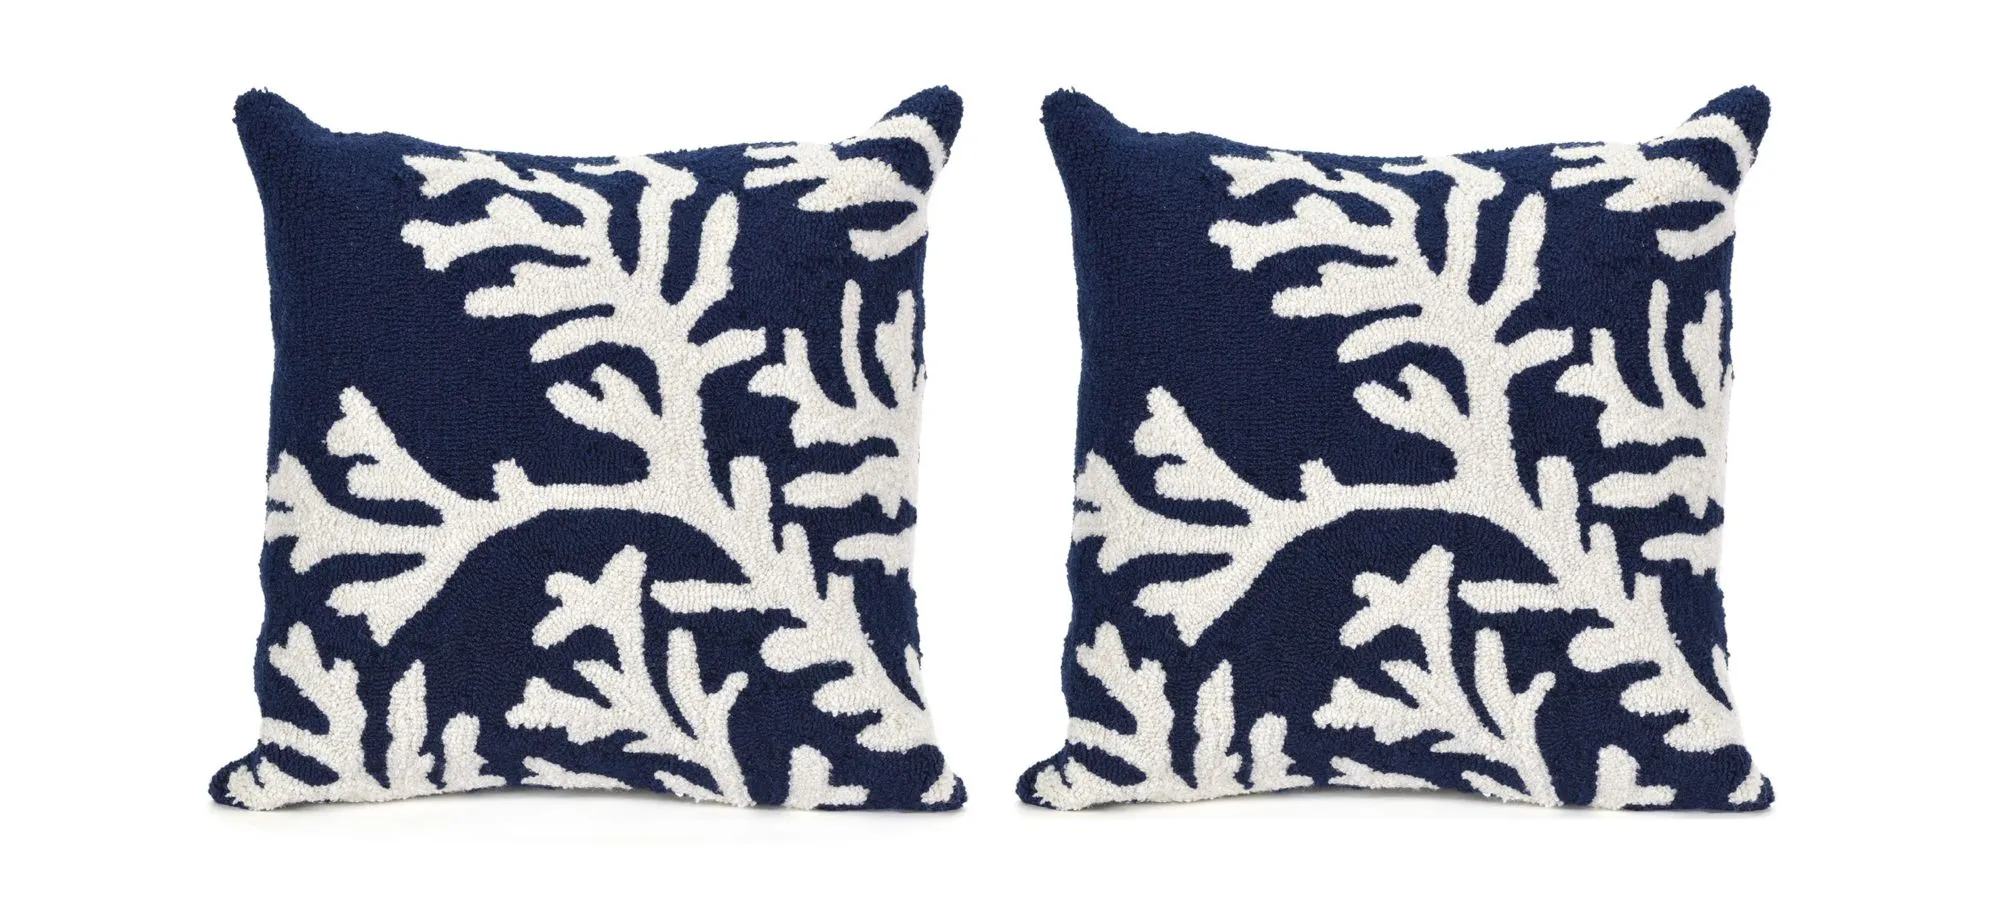 Liora Manne Frontporch Coral Pillow Set - 2 Pc. in Navy by Trans-Ocean Import Co Inc